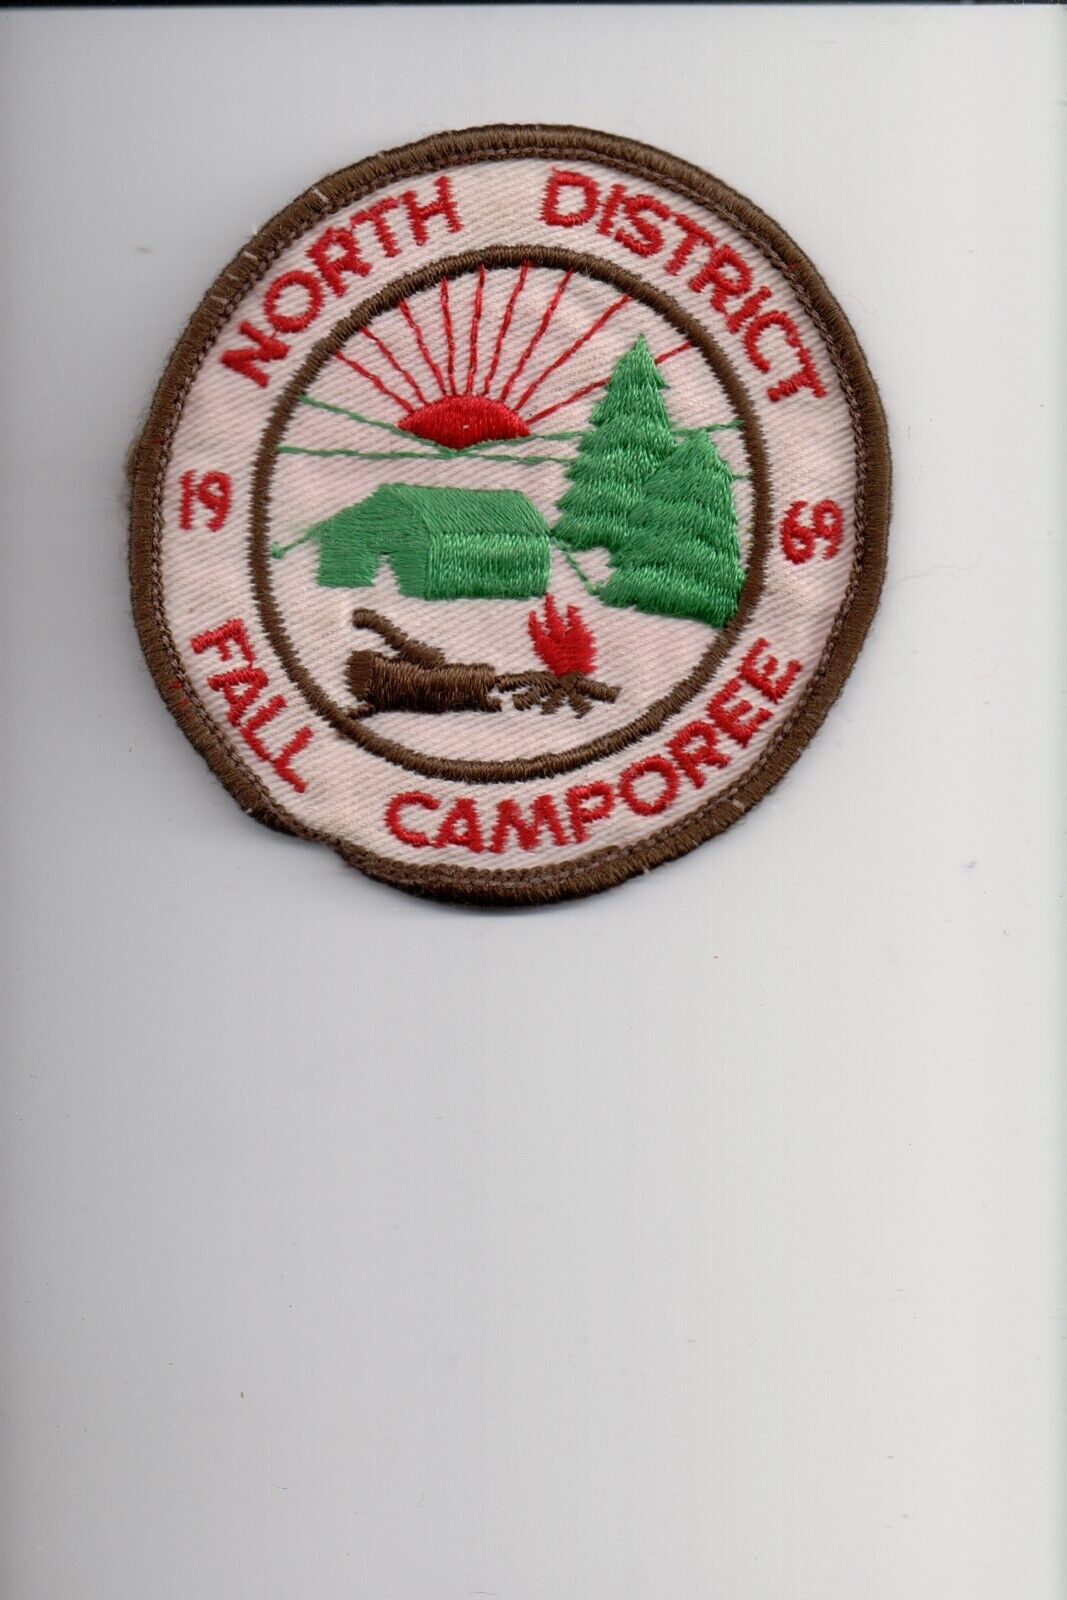 1969 North District Fall Camporee patch